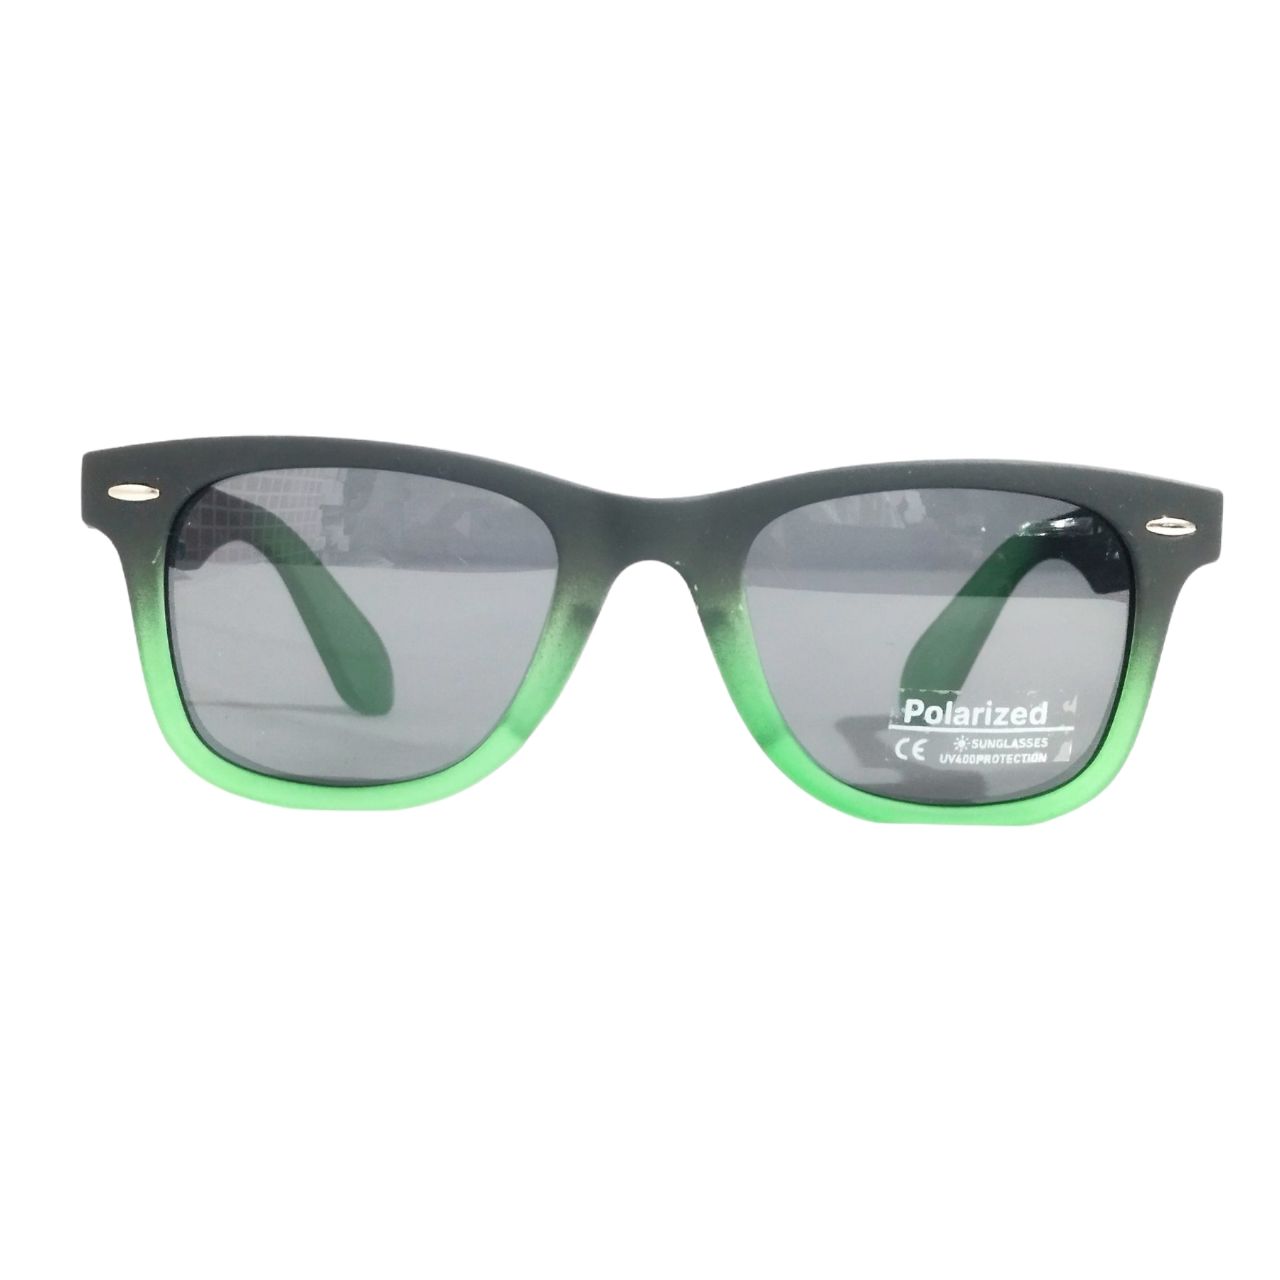 Green Print Classic Polarized Sunglasses for Men and Women